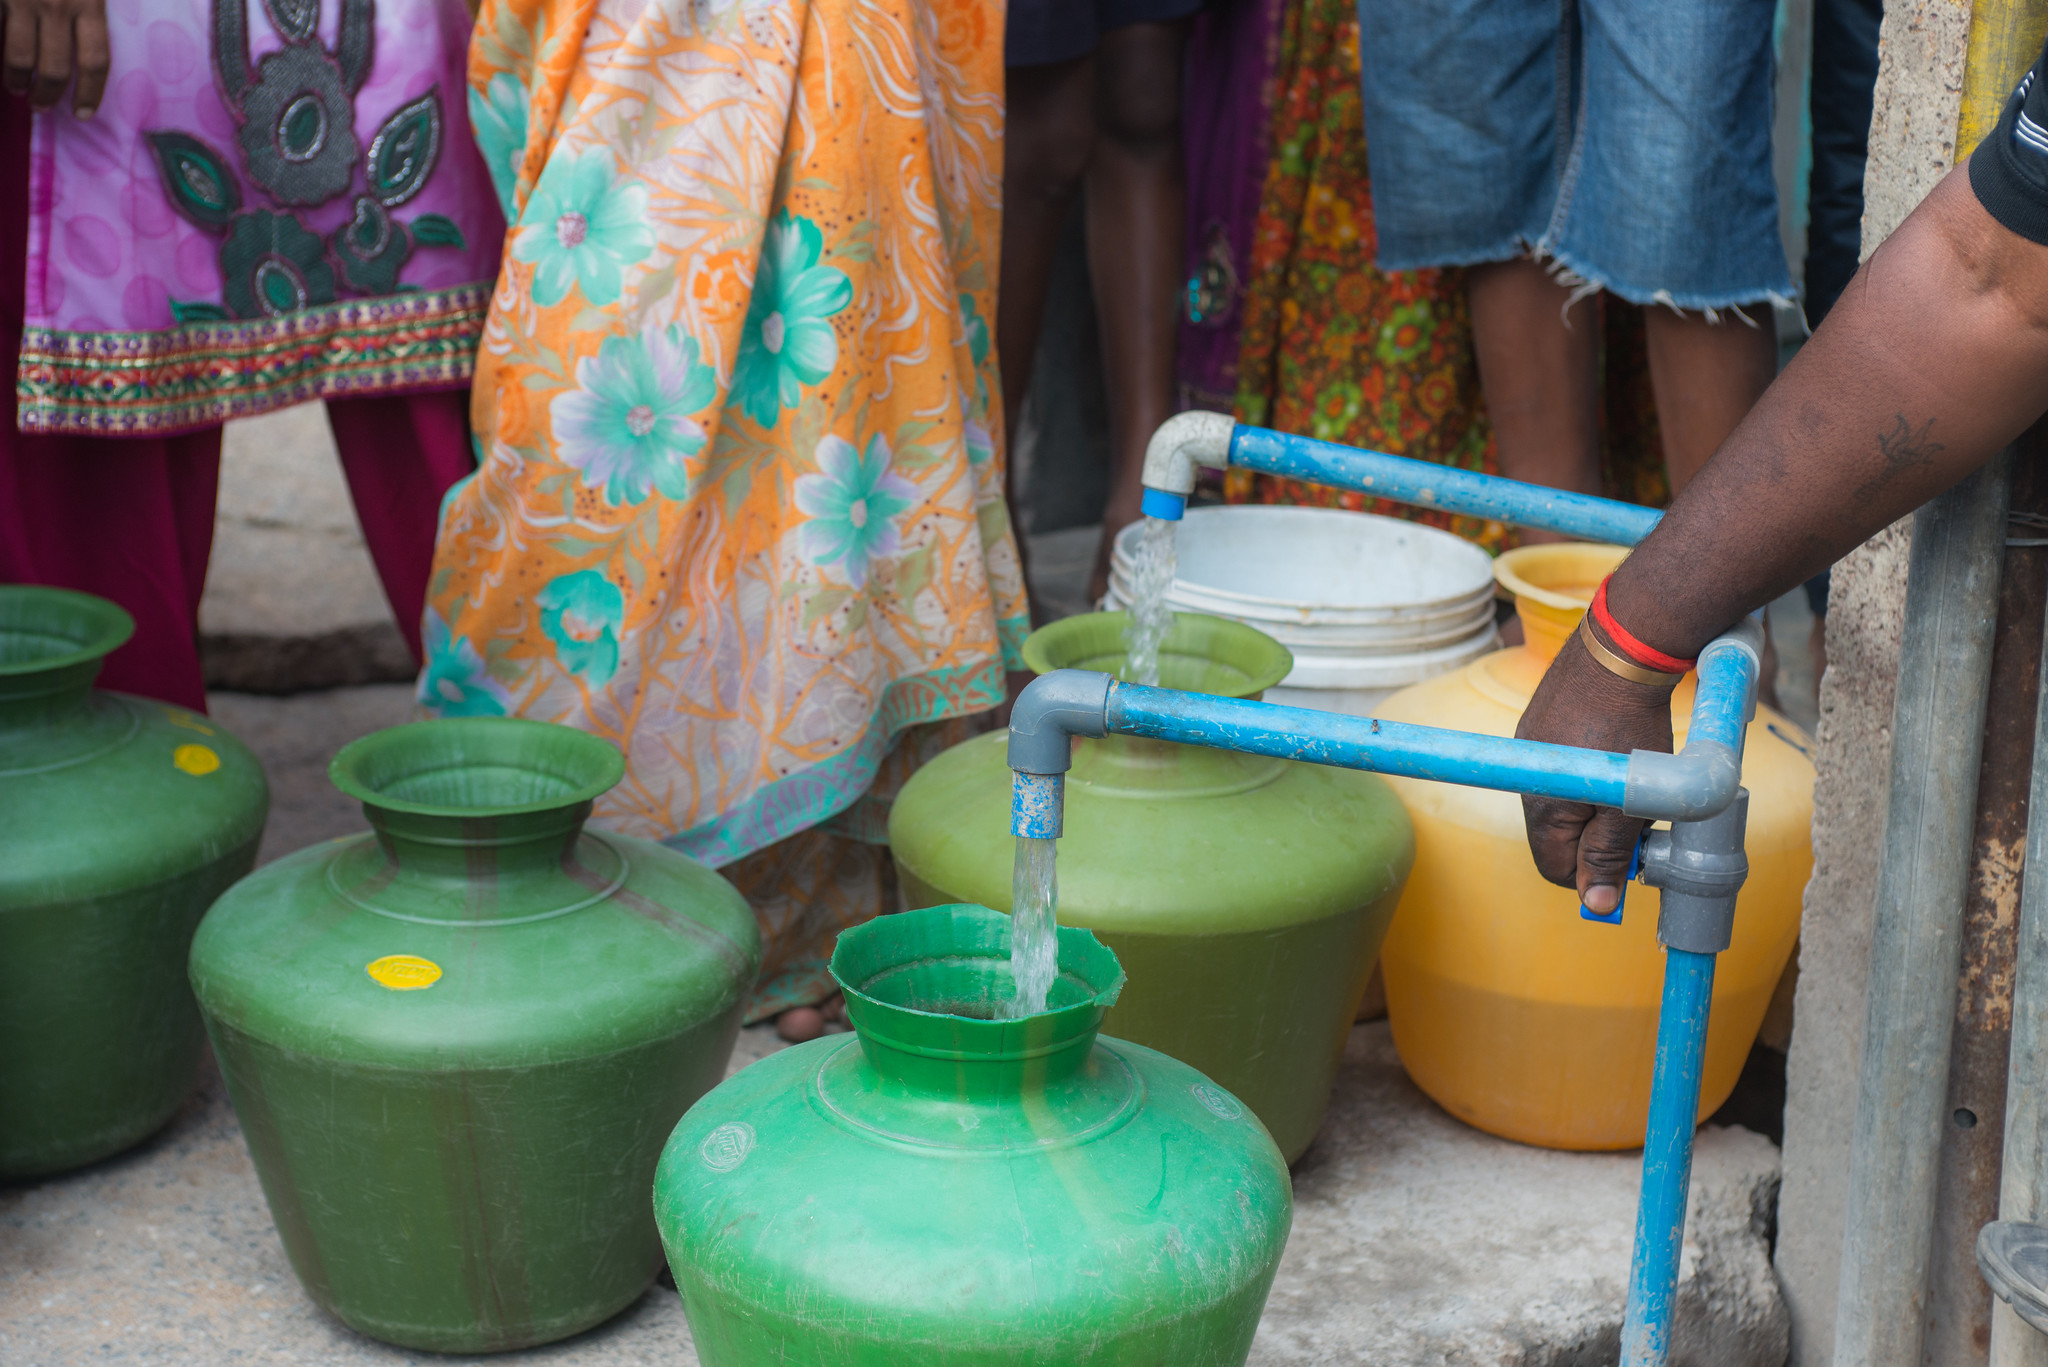 Access to Water and Sanitation is Critical During the COVID-19 Pandemic